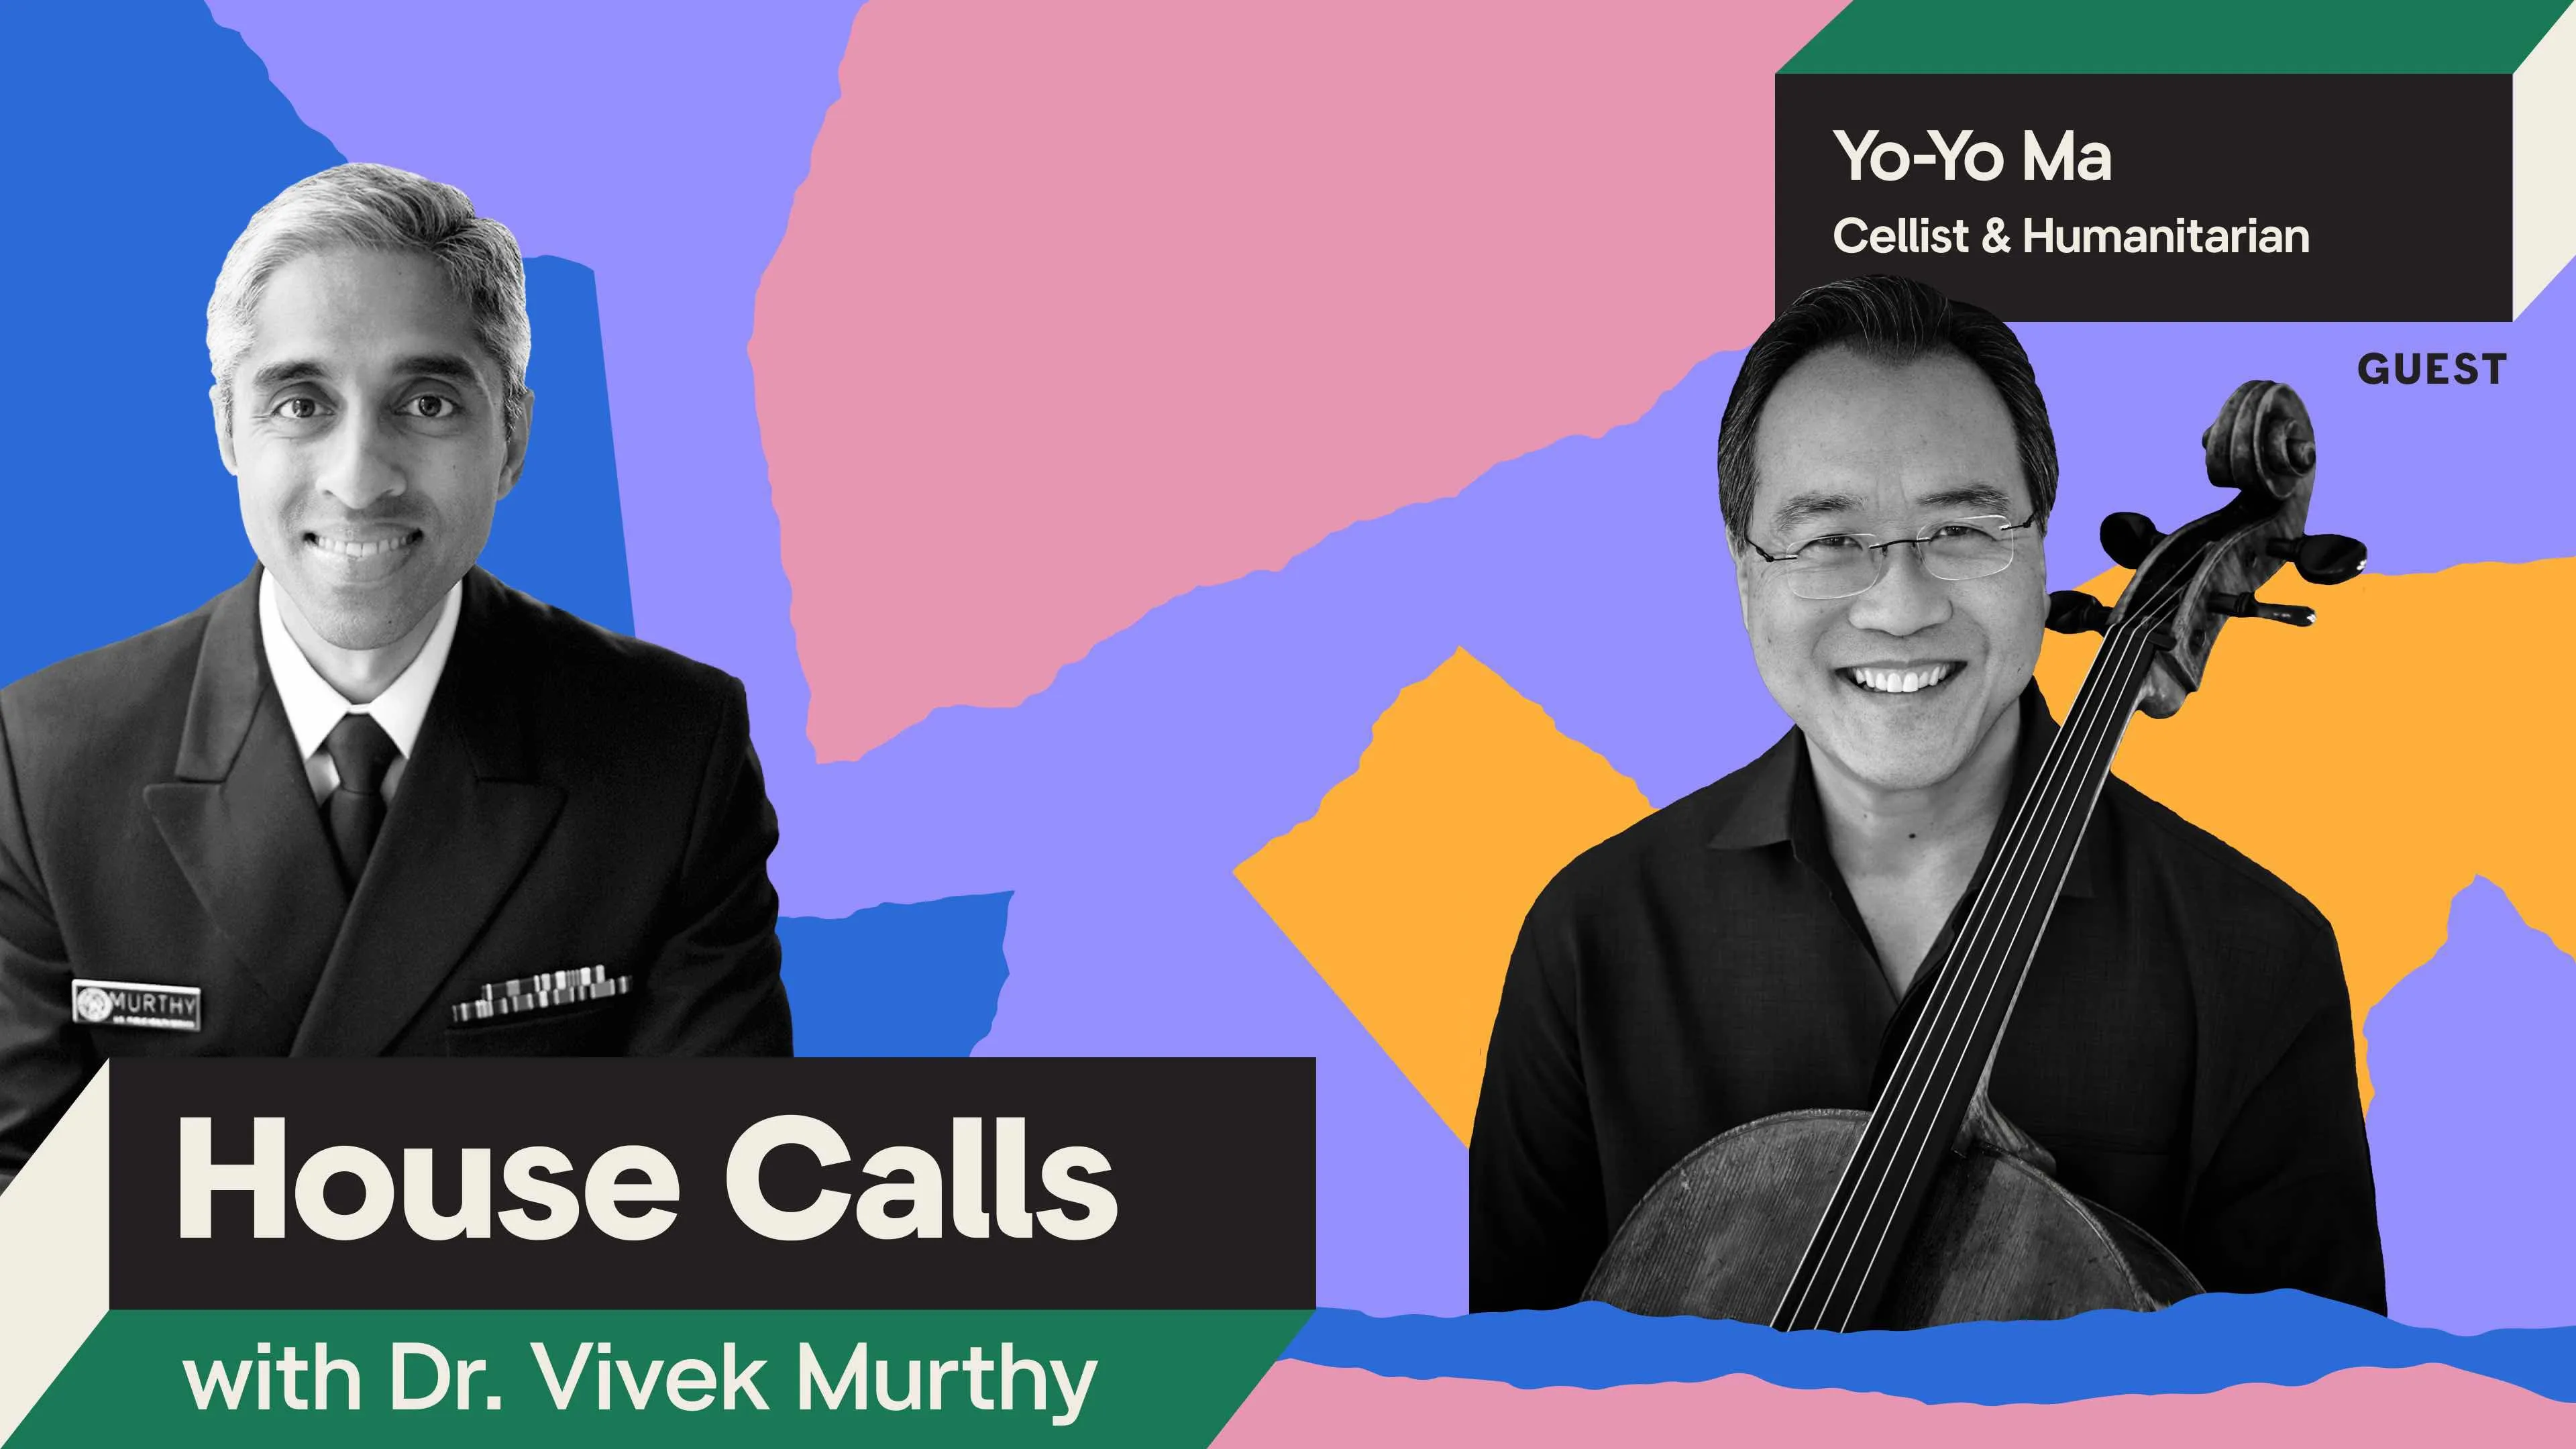 Black and white portraits of Surgeon General Vivek Murthy and Yo-Yo Ma with a colorful background.